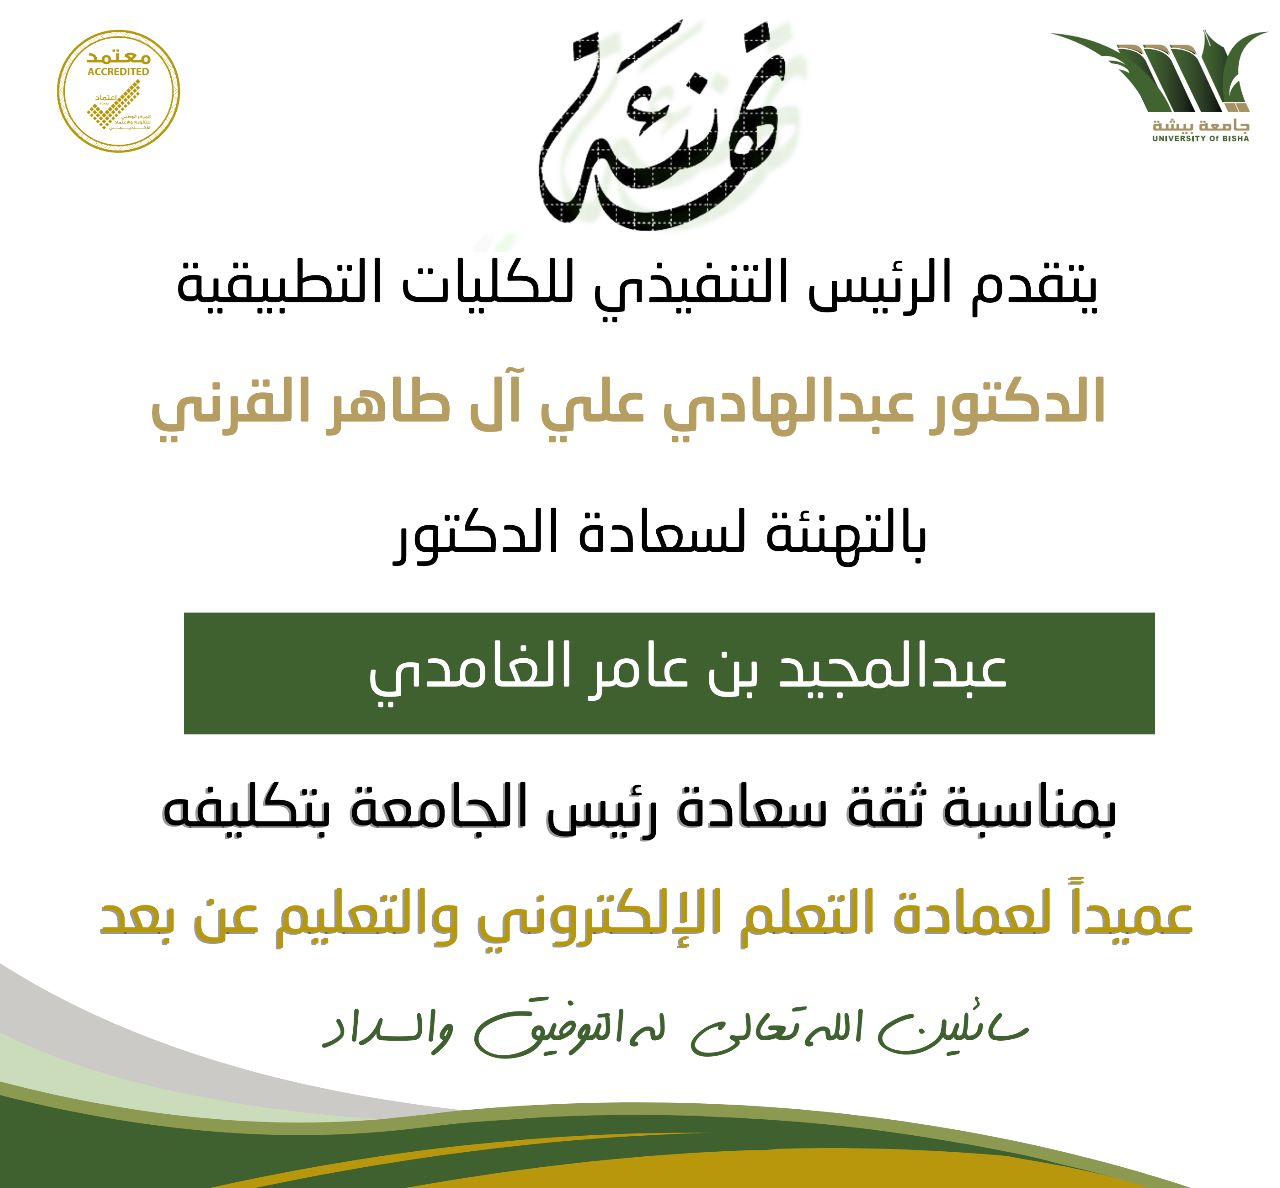 His Excellency the CEO of the College and its employees congratulate His Excellency Dr. Abdul Majeed Al-Ghamdi